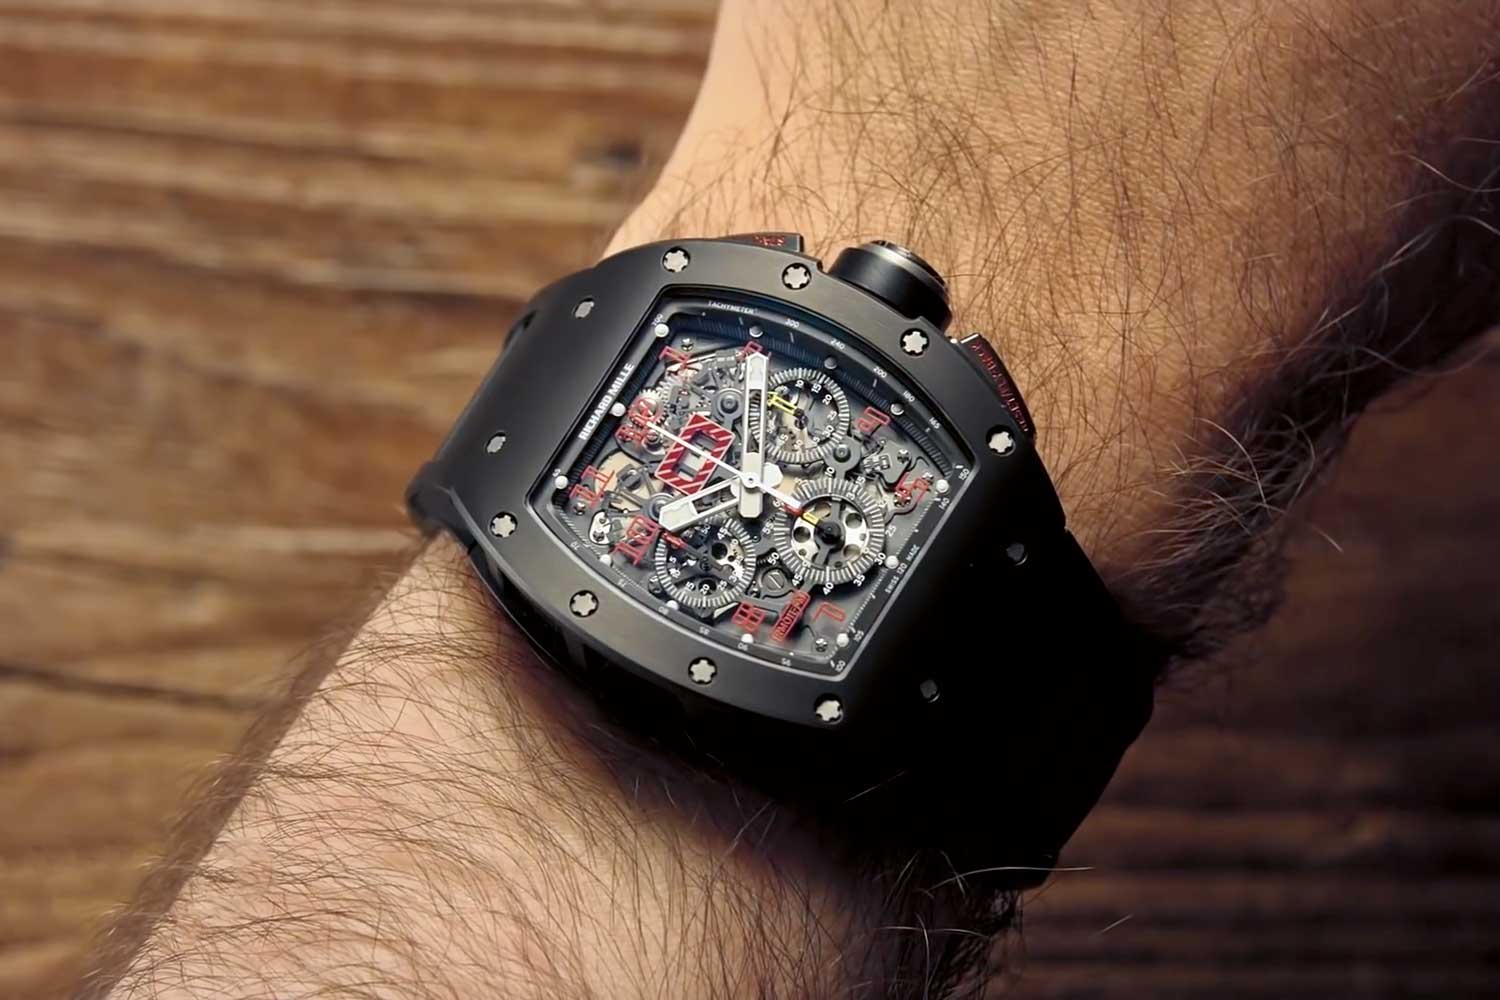 The journey has come full circle, with wristwatches now offering the pocket watch lifestyle. Pictured here is the Richard Mille Felipe Massa RM 011